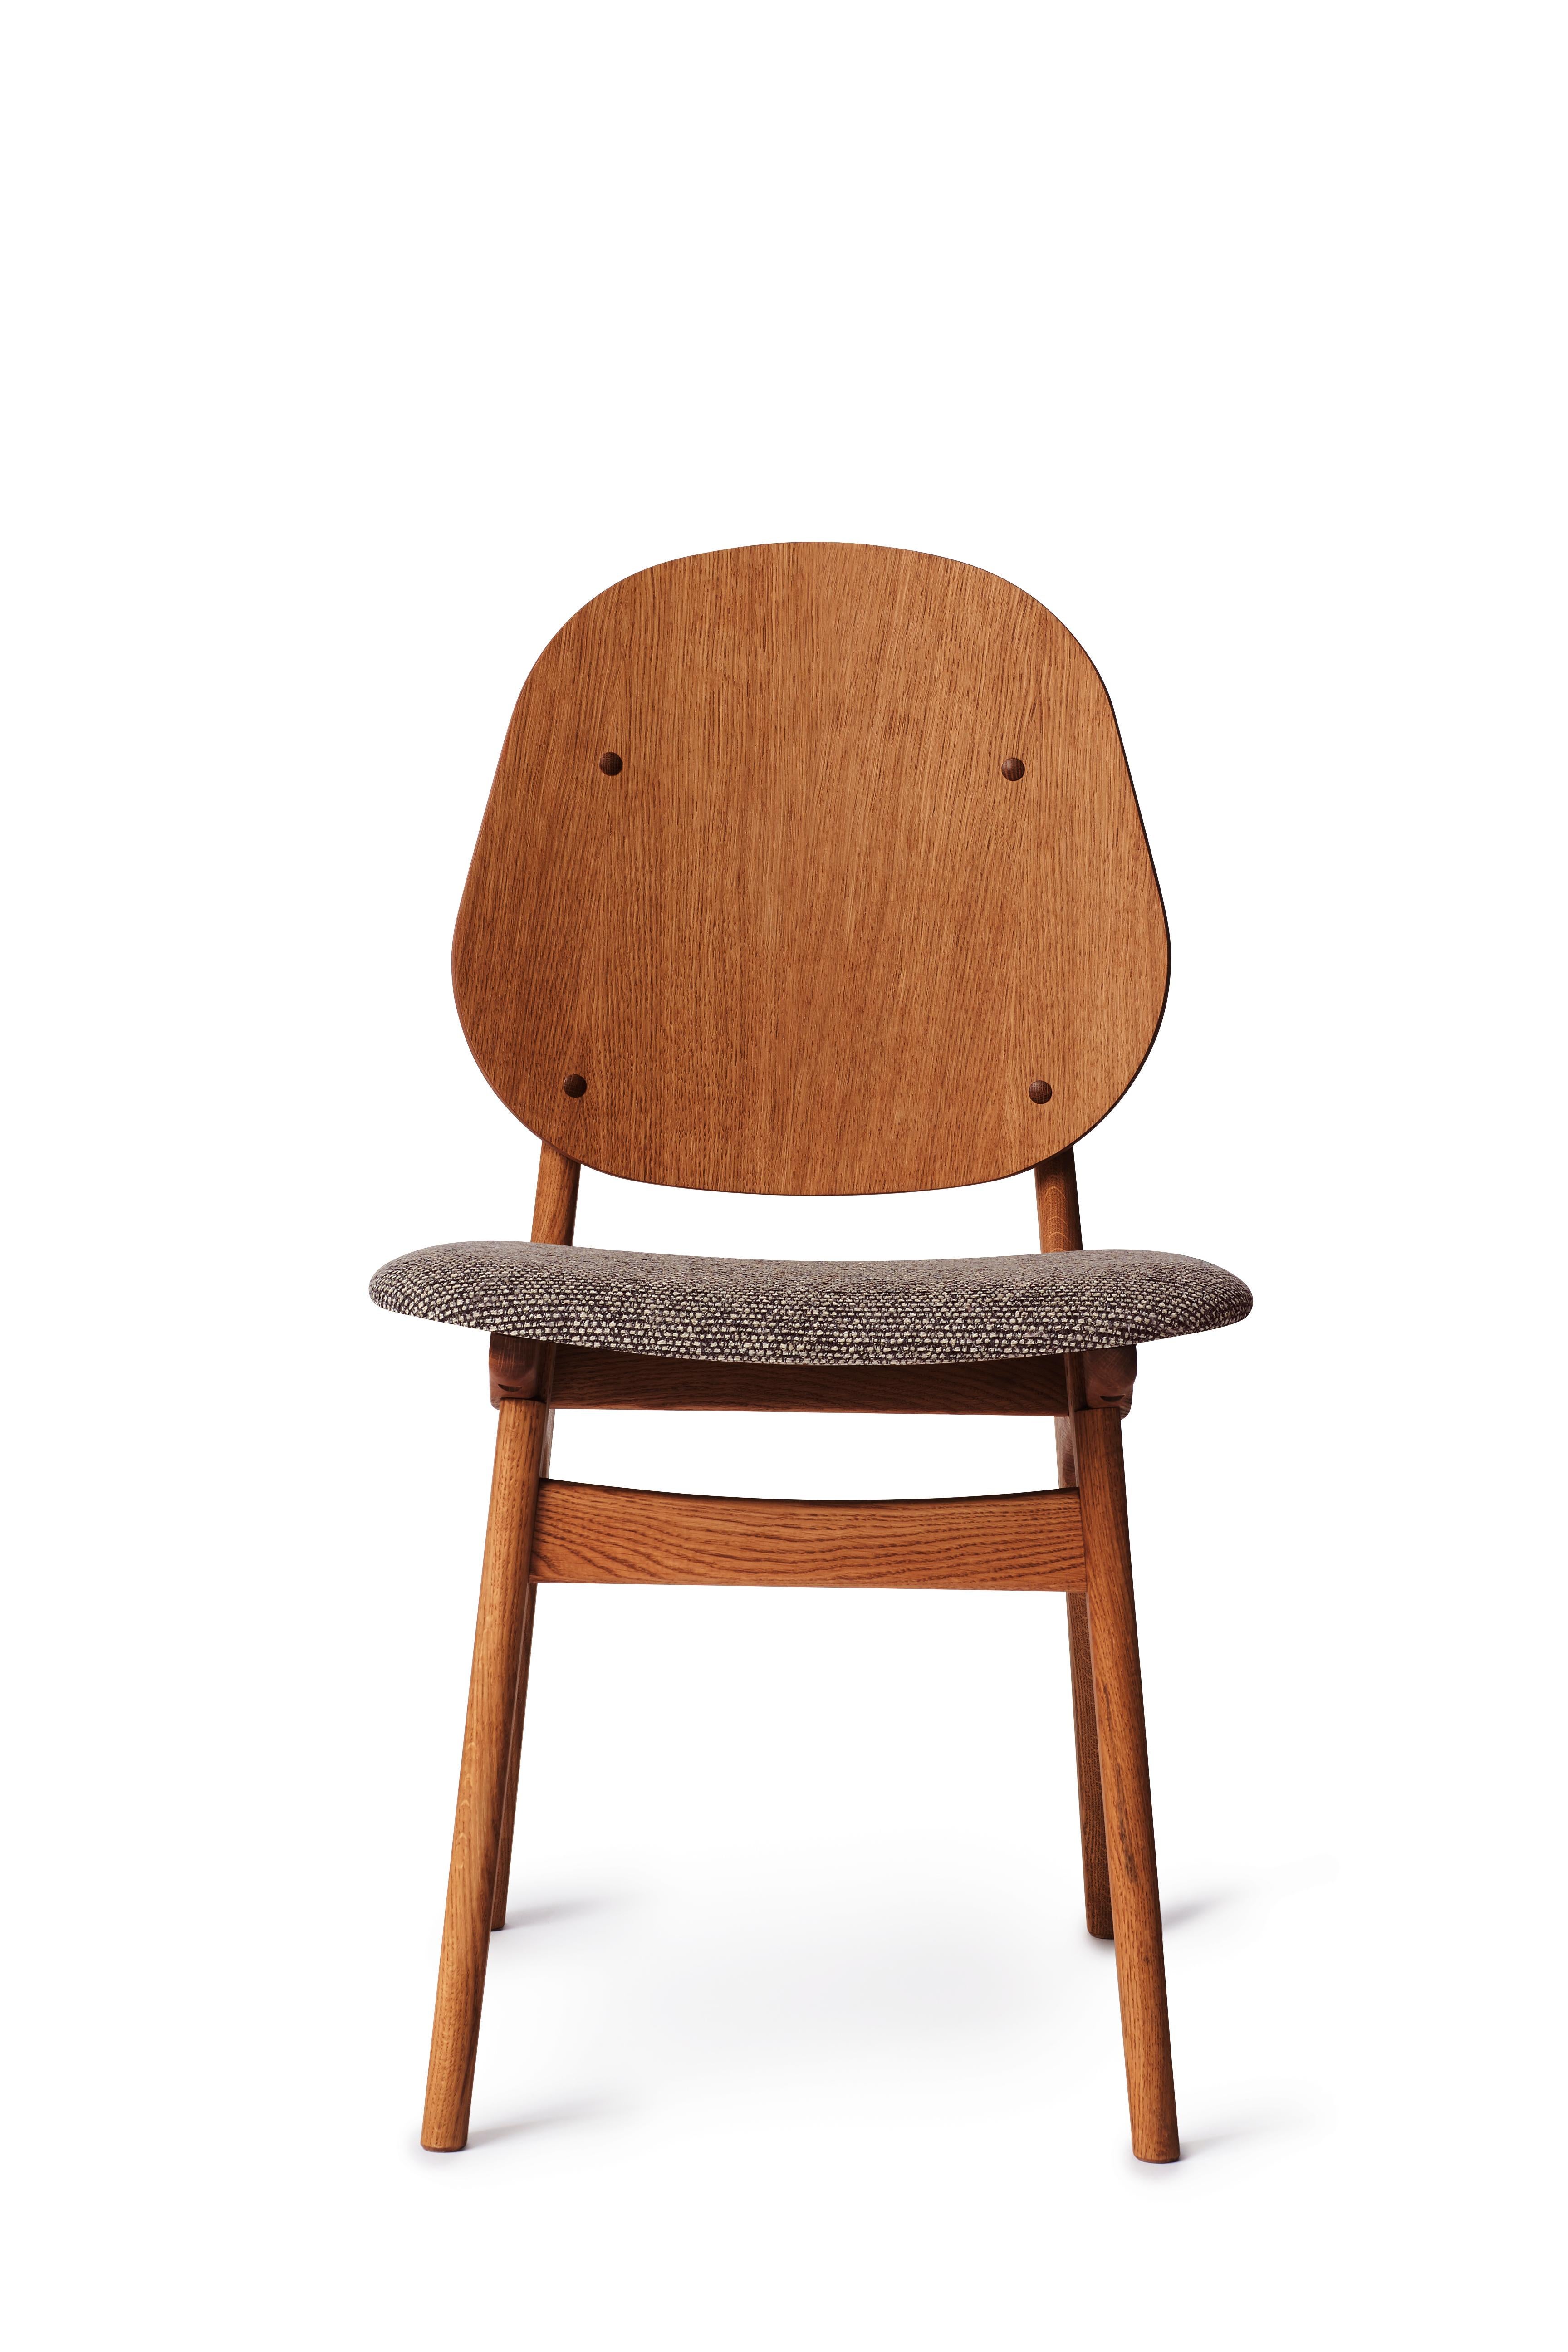 For Sale: Black (Savanna 622) Noble Chair in Teak Oak with Upholstery, by Arne Hovmand-Olsen from Warm Nordic